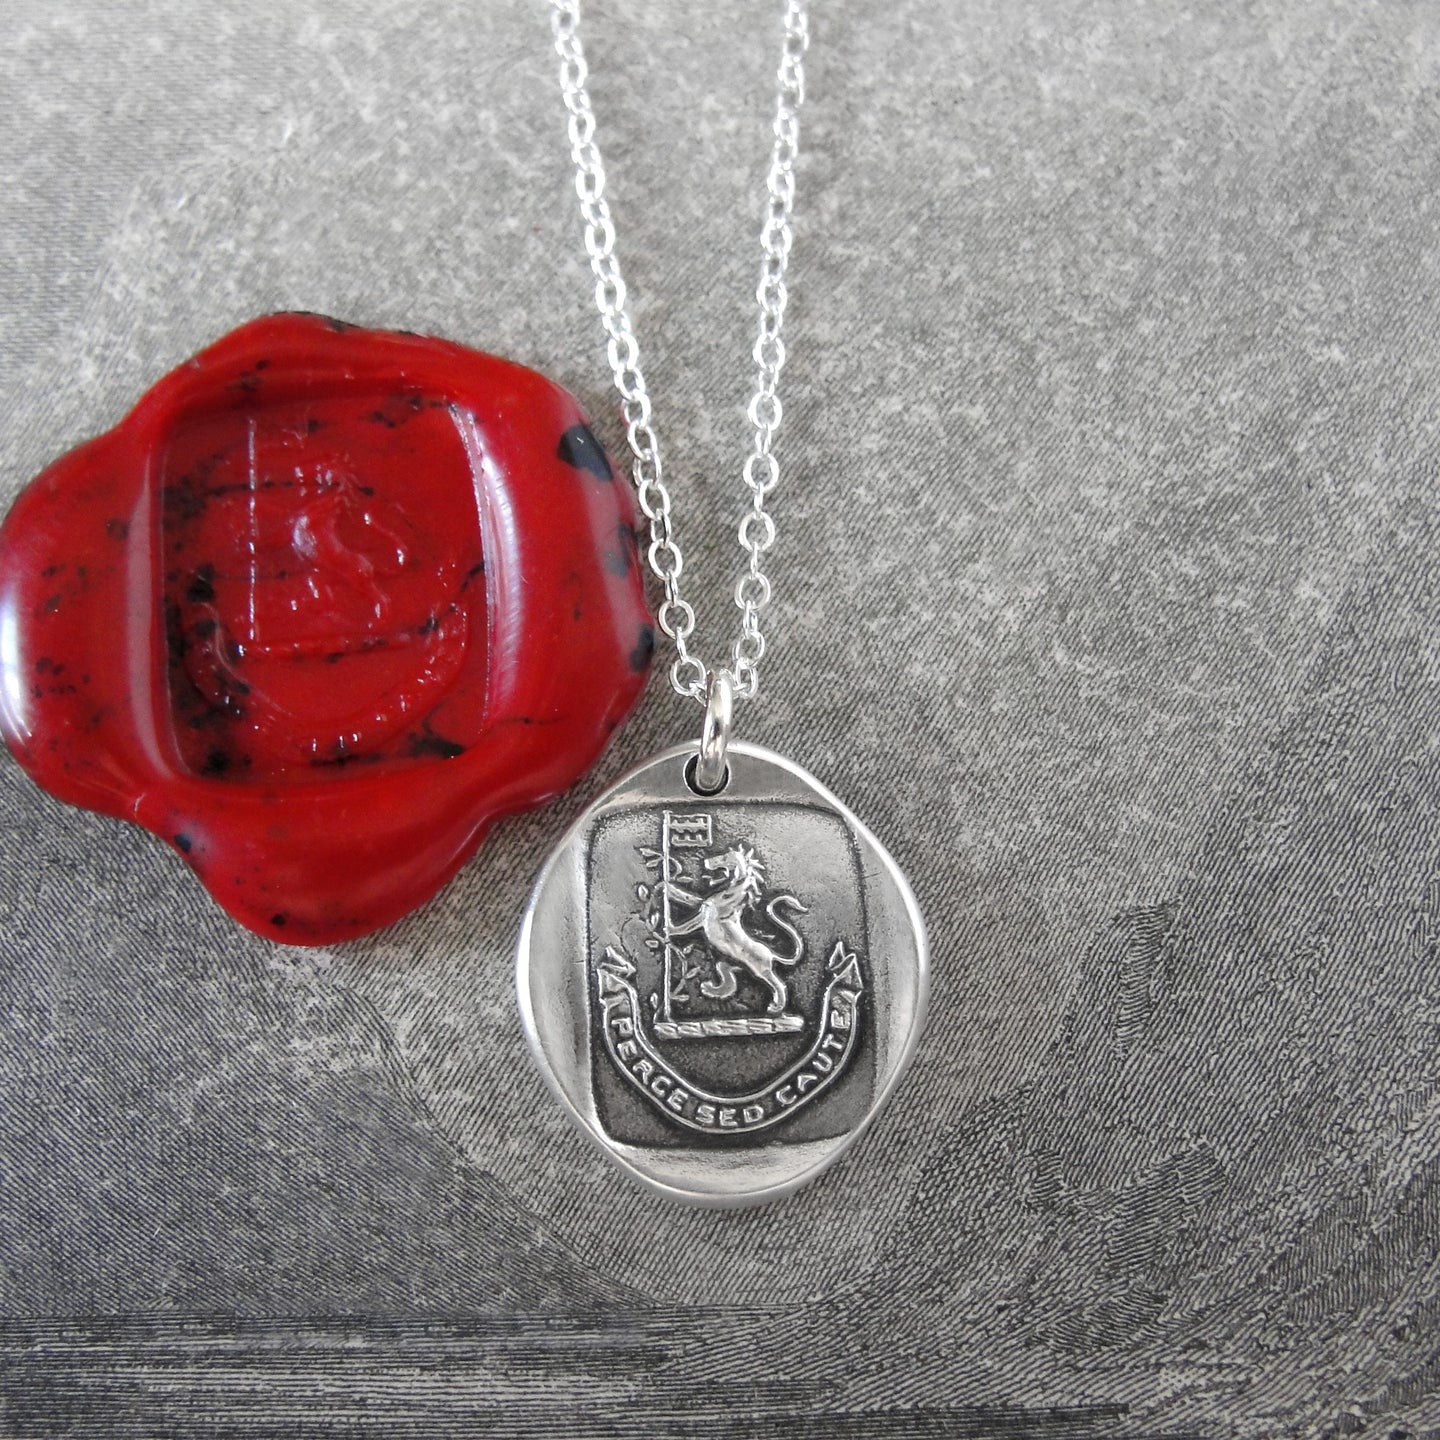 Proceed With Caution - Silver Wax Seal Necklace - Rampant Lion Flag Bearer Bravery - RQP Studio